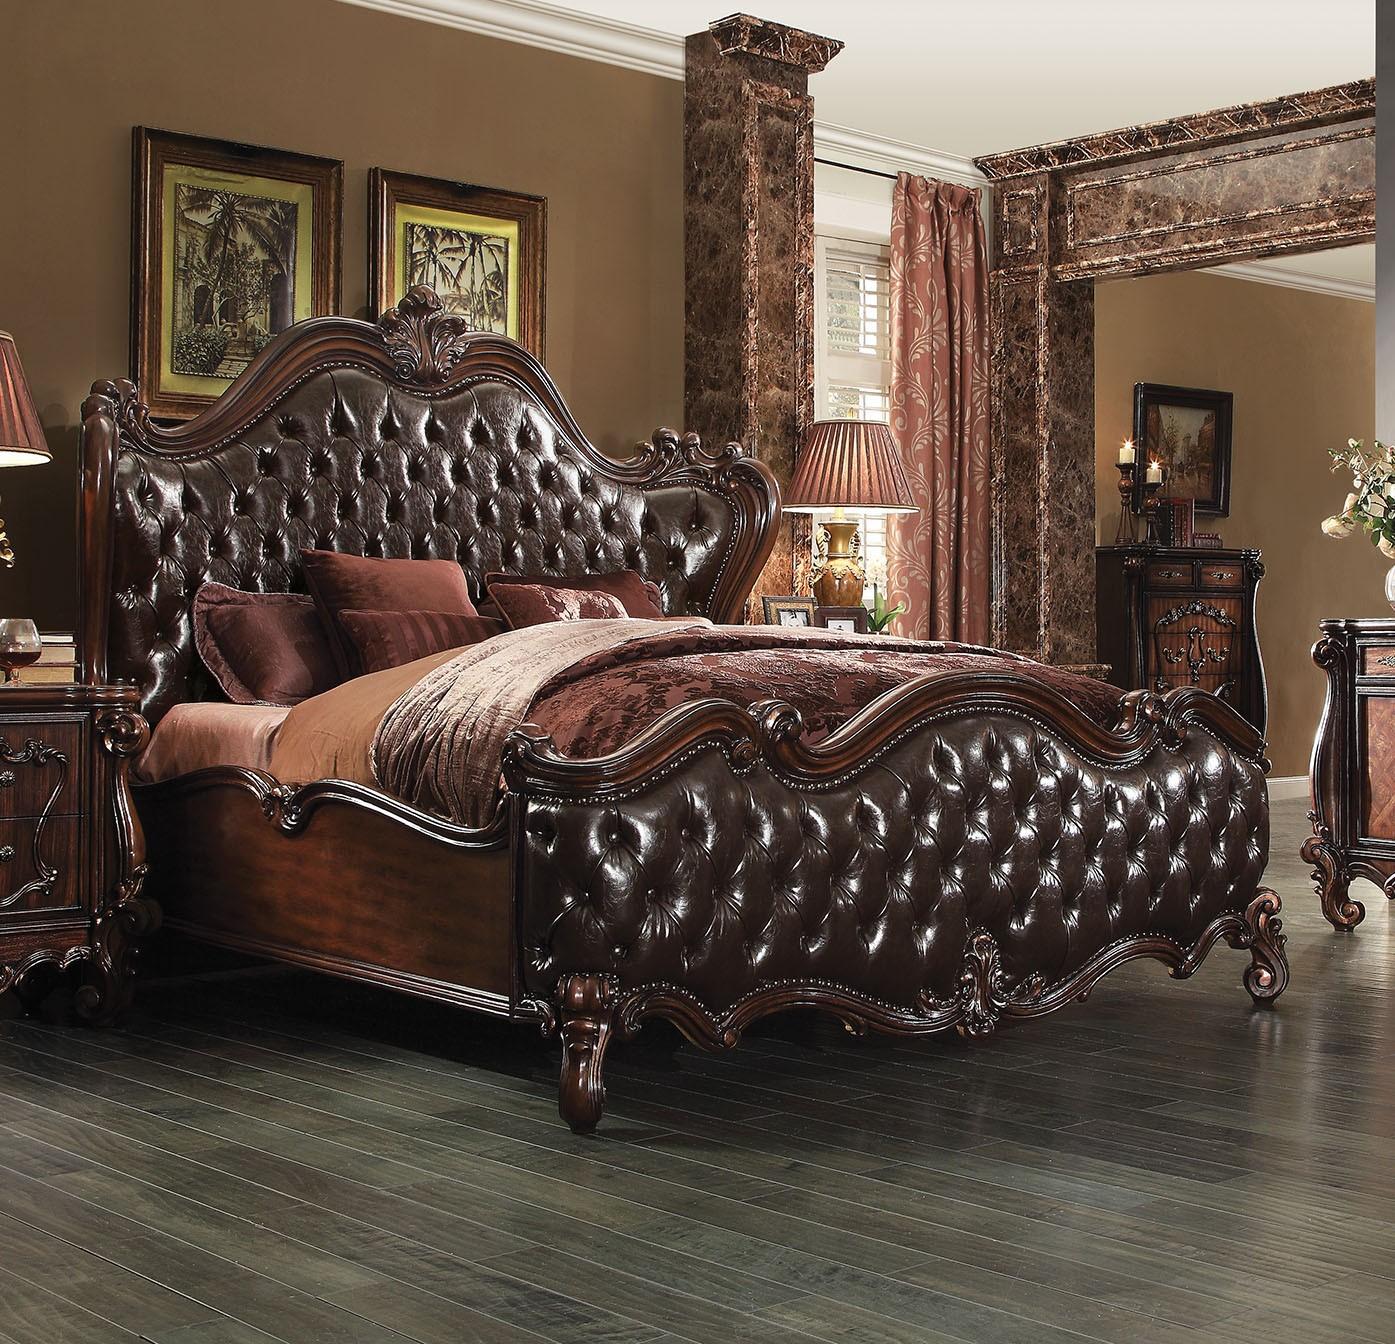 Classic, Traditional Panel Bed SKU: AJHS2276-Q SKU: AJHS2276-Q in Brown, Cherry Finish Polyurethane